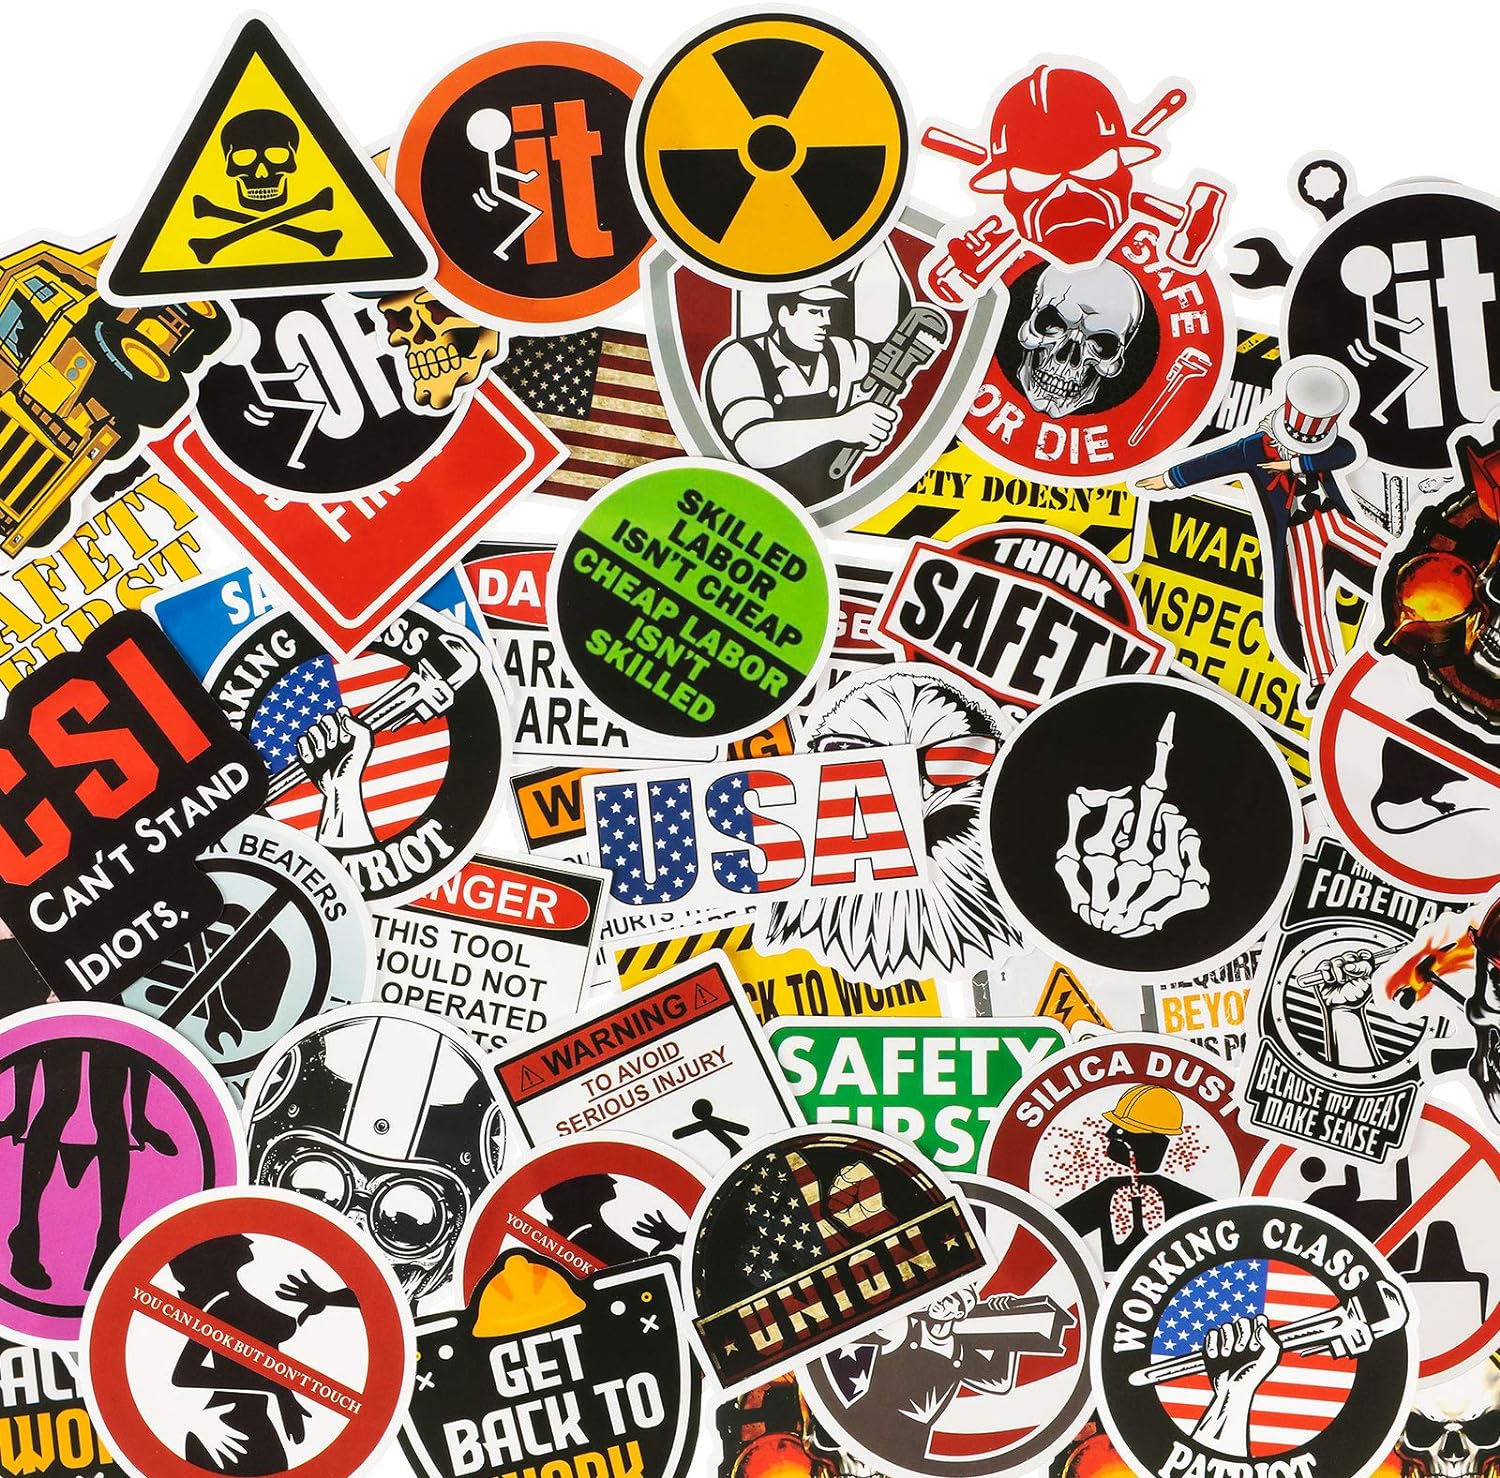 300 Pieces Hard Hat Stickers Funny Stickers for Tool Box Helmet Welding Construction Union Iron Lineman Oilfield Electrician, Make People Laugh at Work (Classic Style)